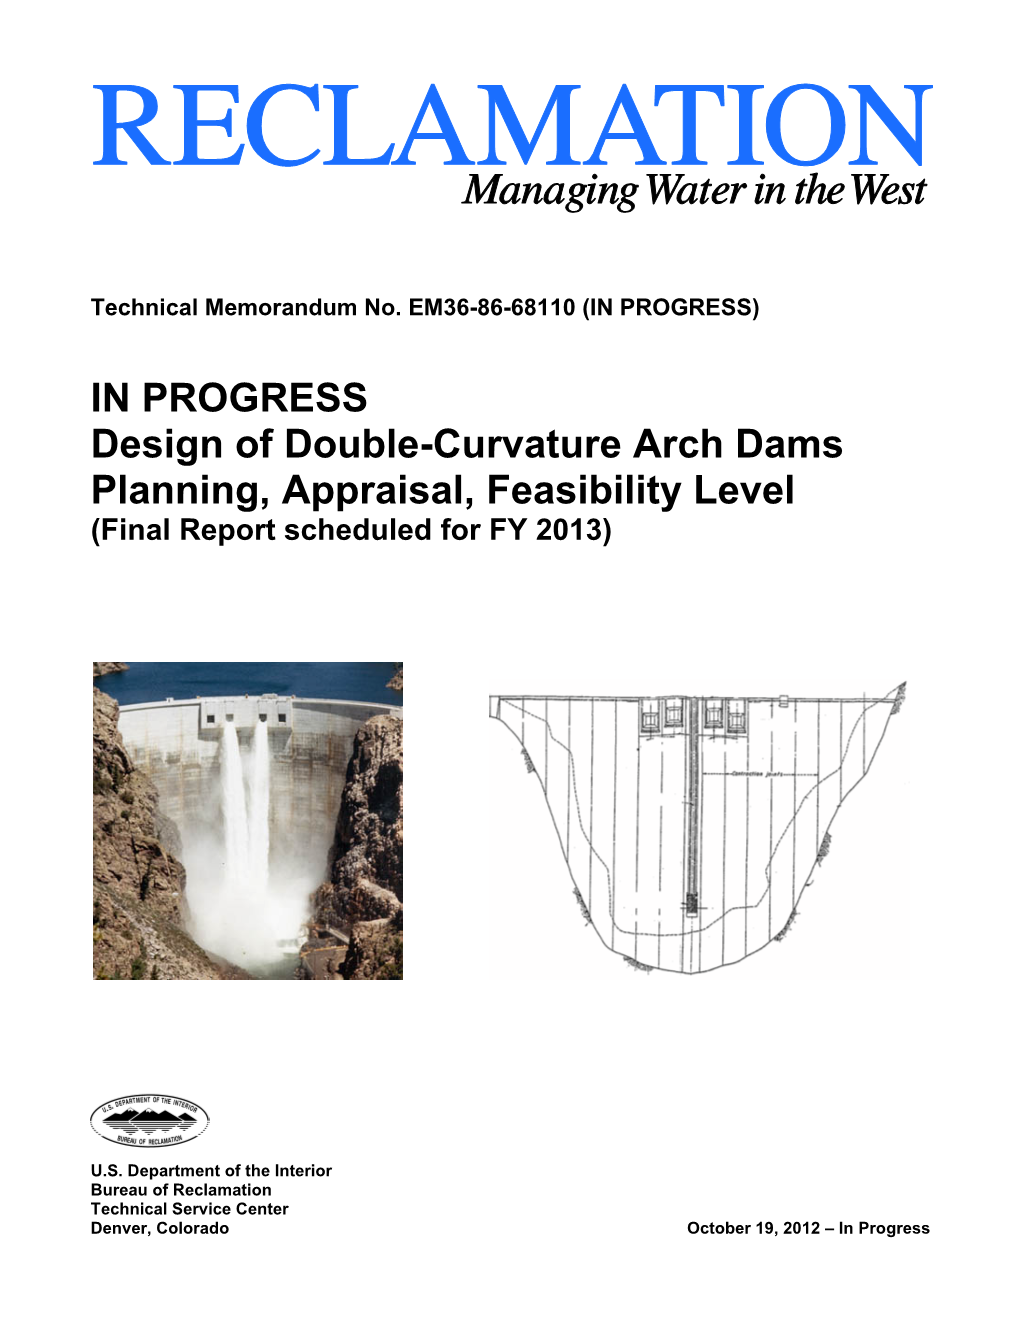 Double Curvature Arch Dams – Planning, Appraisal, and Feasibility Level (Final Report Scheduled for FY 2013)